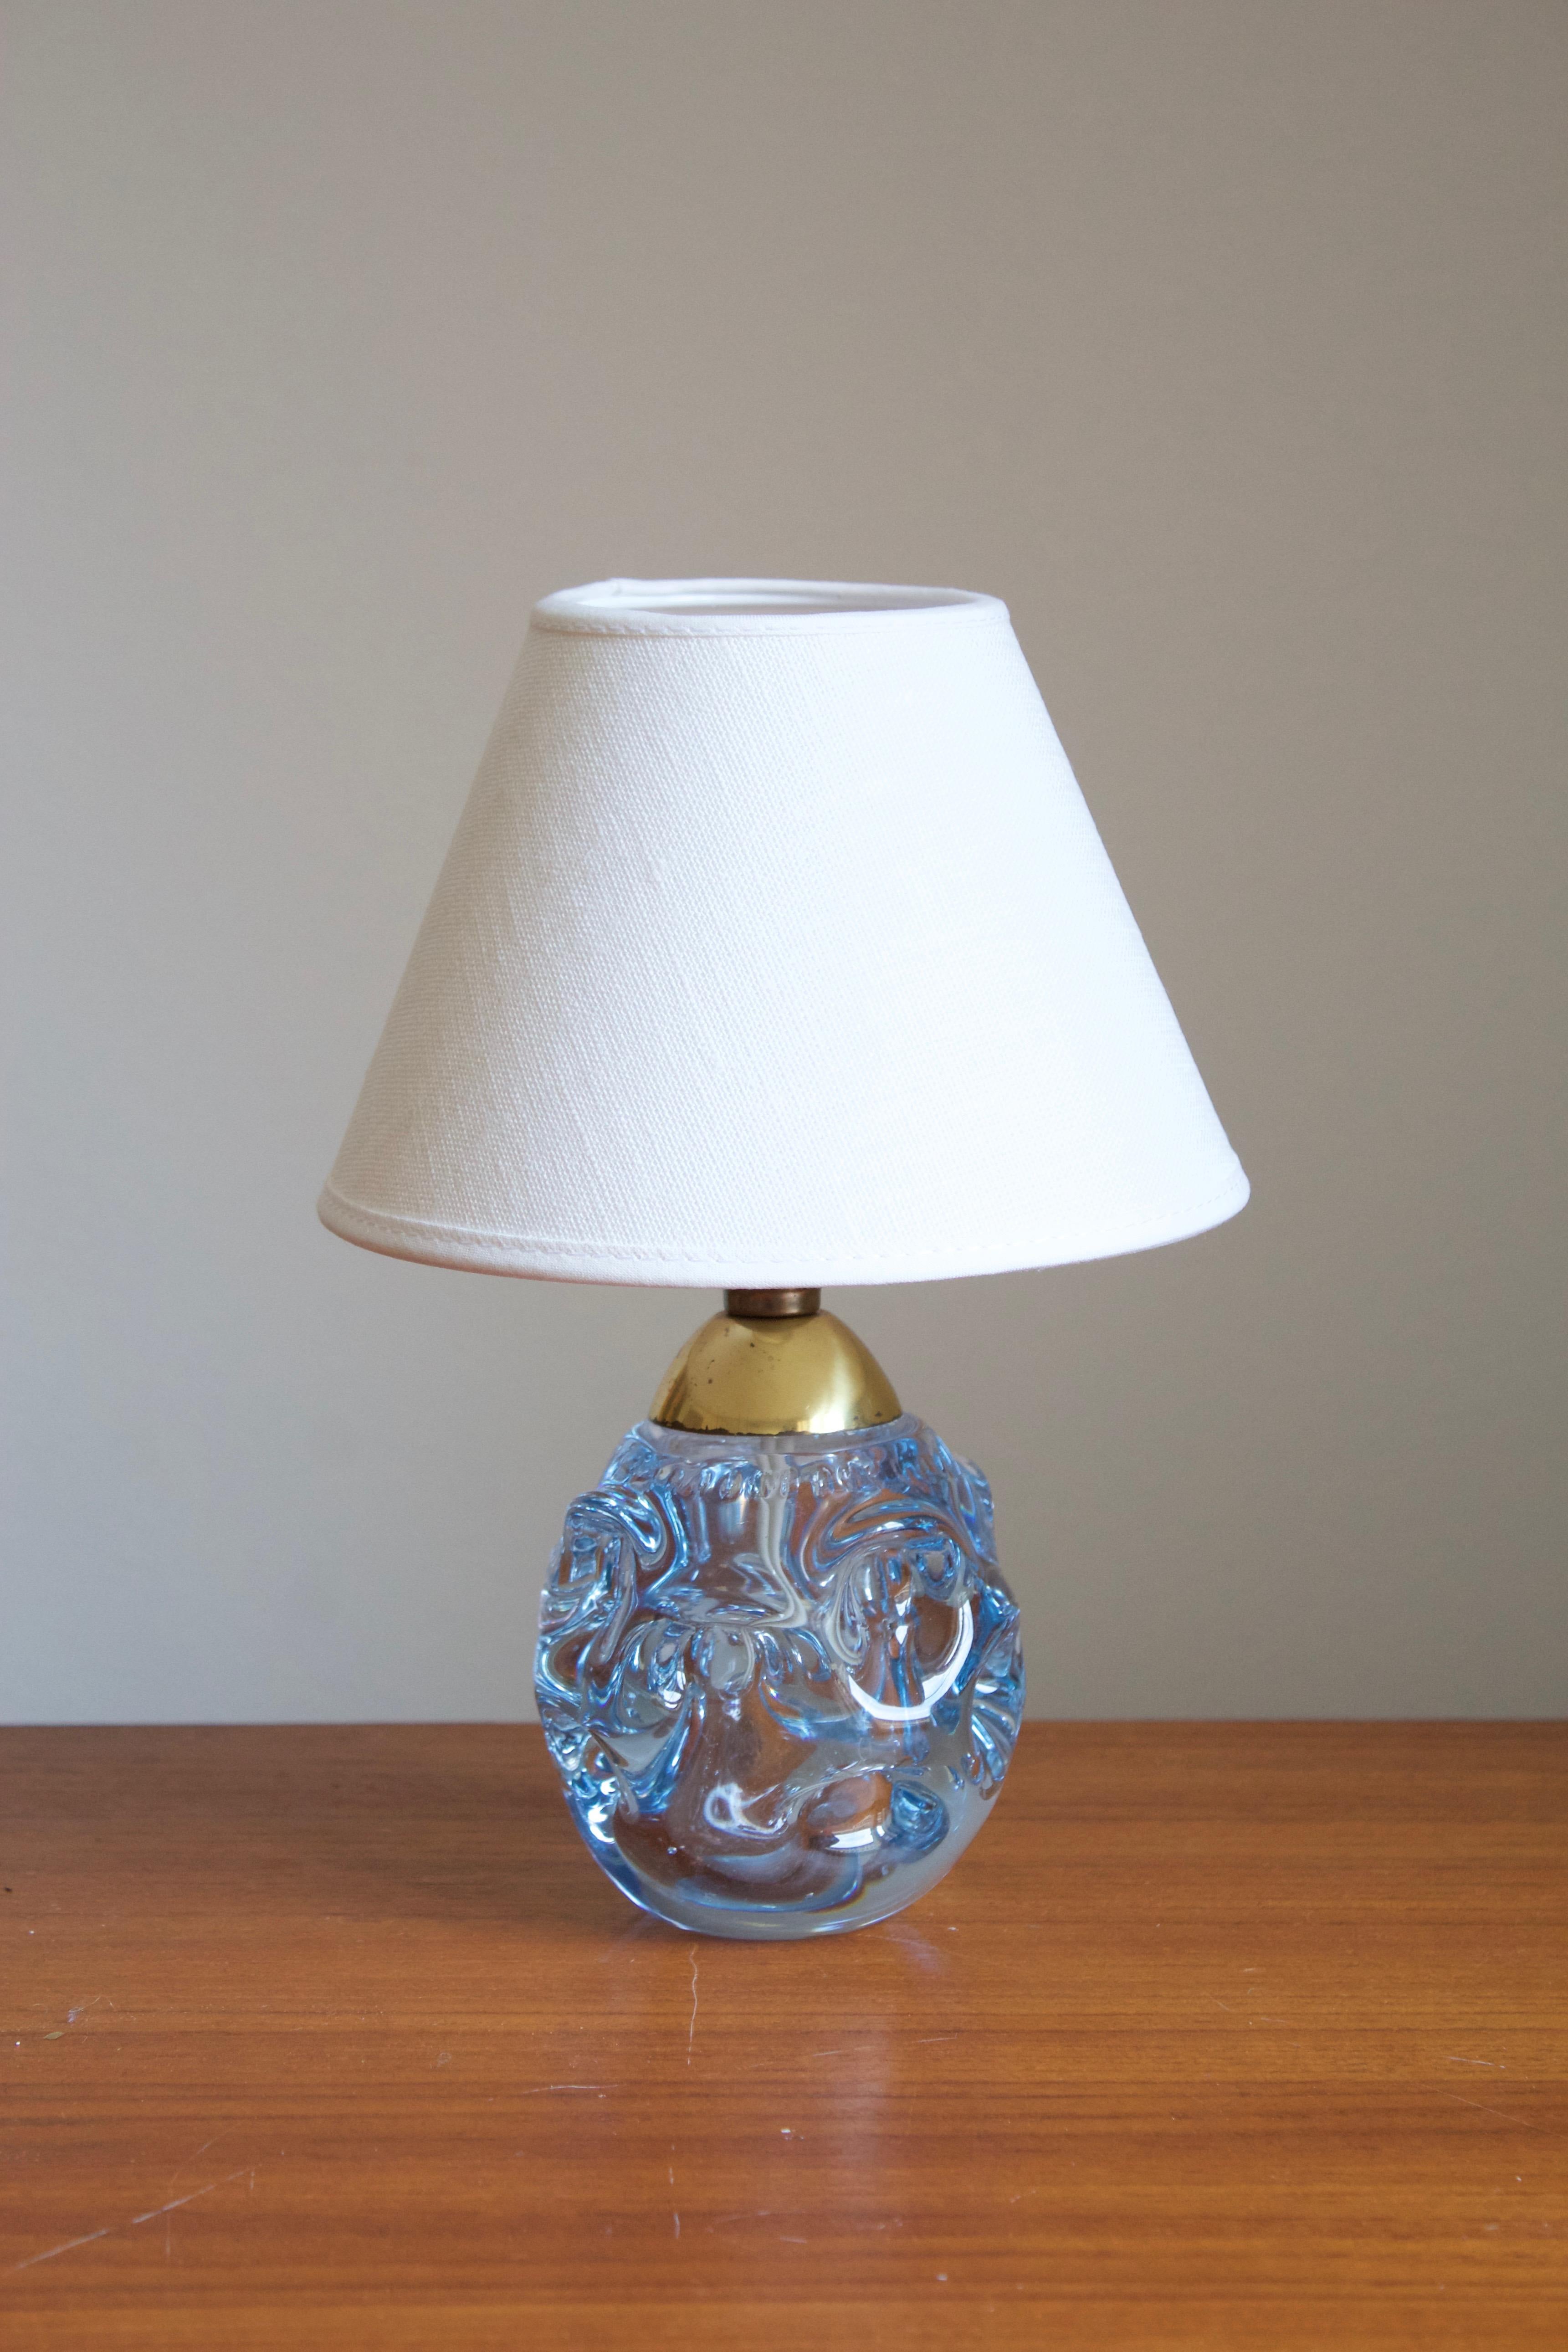 A very small organic table lamp in highly artistic form. Design attributed to Börne Augustsson, Åseda Sweden, 1950s.

Stated dimensions exclude lampshade. Height includes socket. Sold without lampshade.